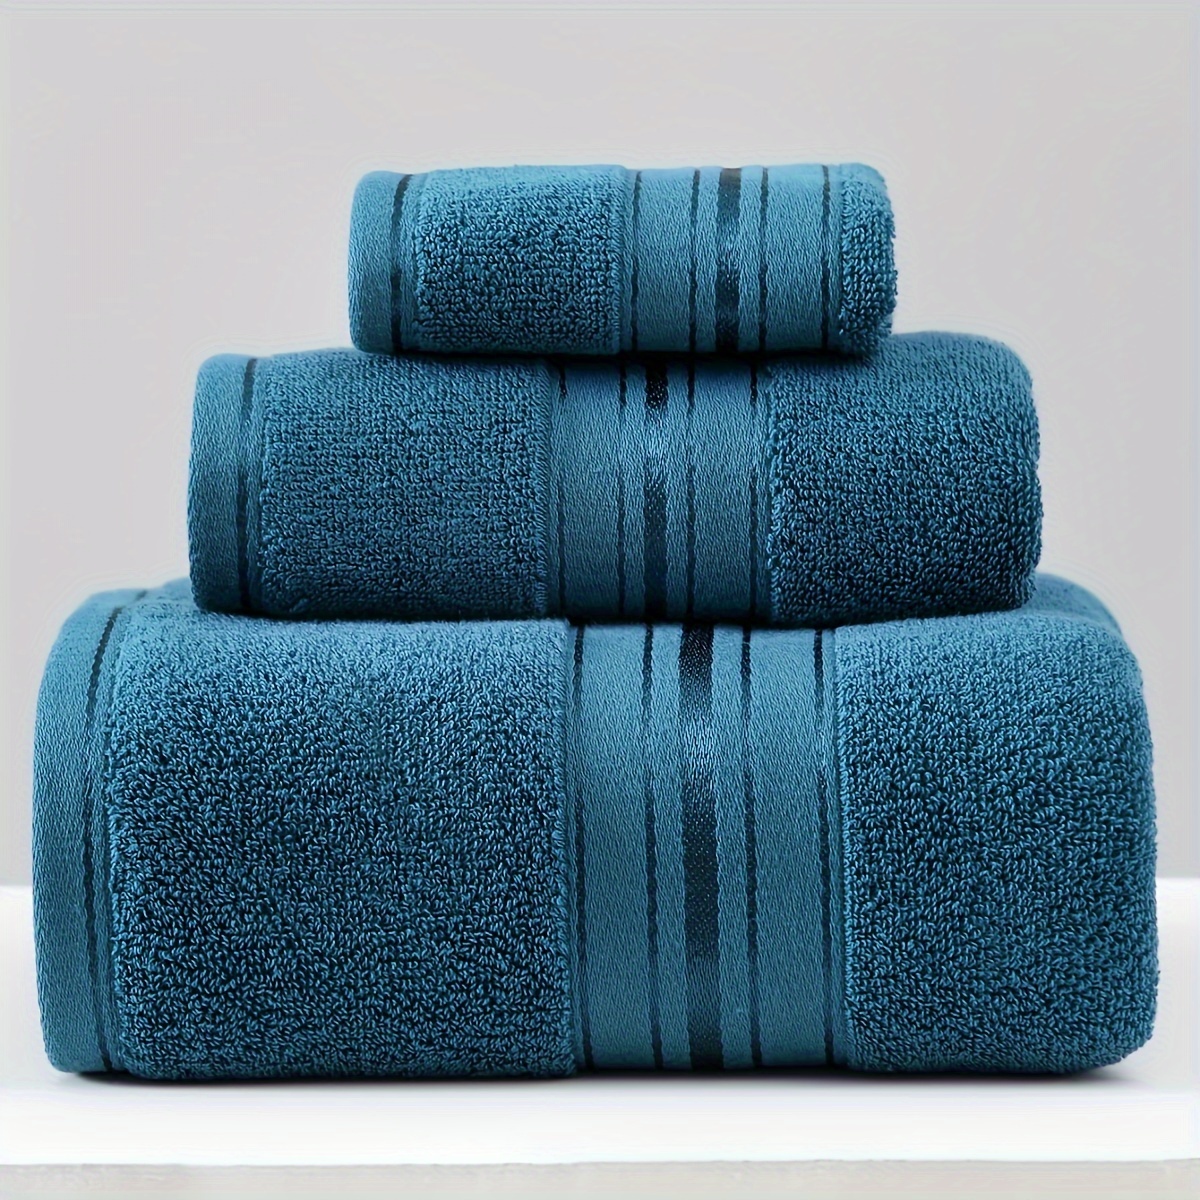 

Luxury 3-piece Cotton Bath Towel Set - Ultra-soft, Highly Absorbent & Thick For Everyday Use And Essential Bathroom Accessories